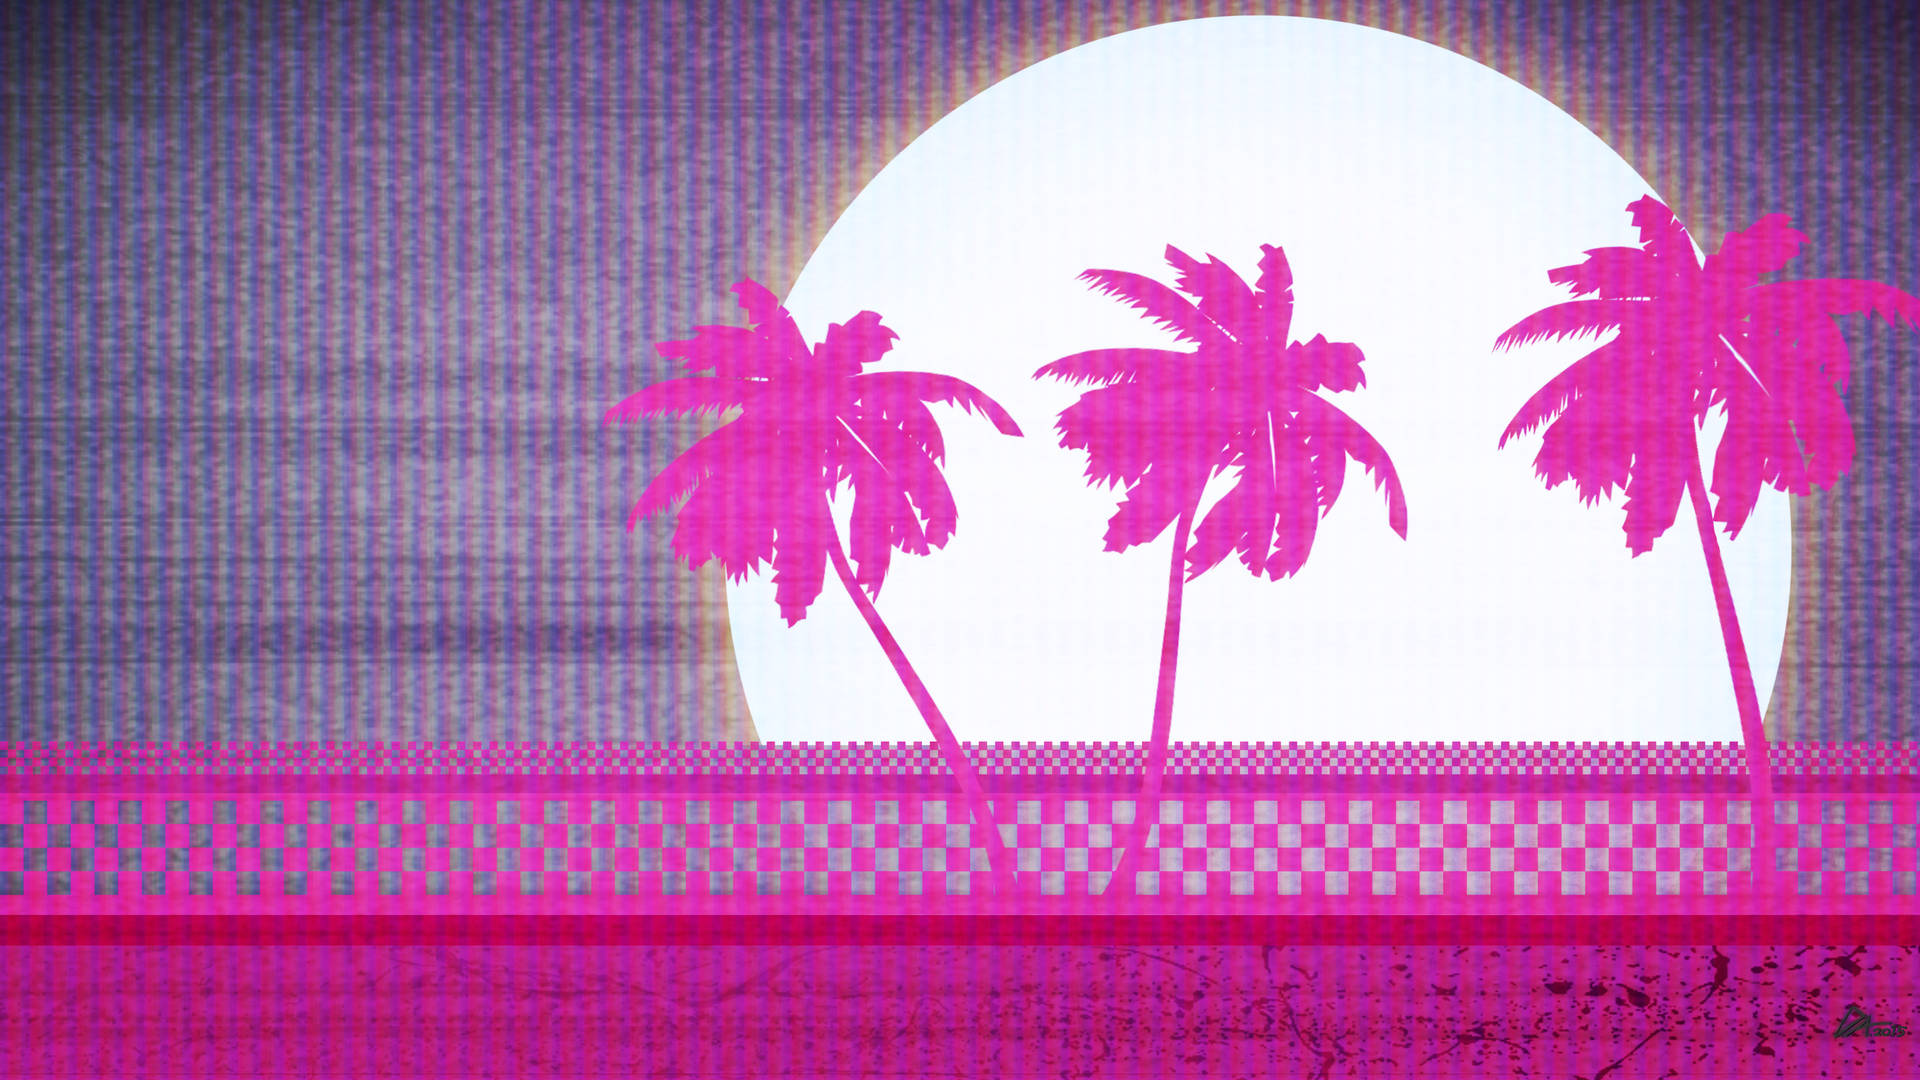 "Welcome to Hotline Miami, a world of neon colors and endless possibilities" Wallpaper